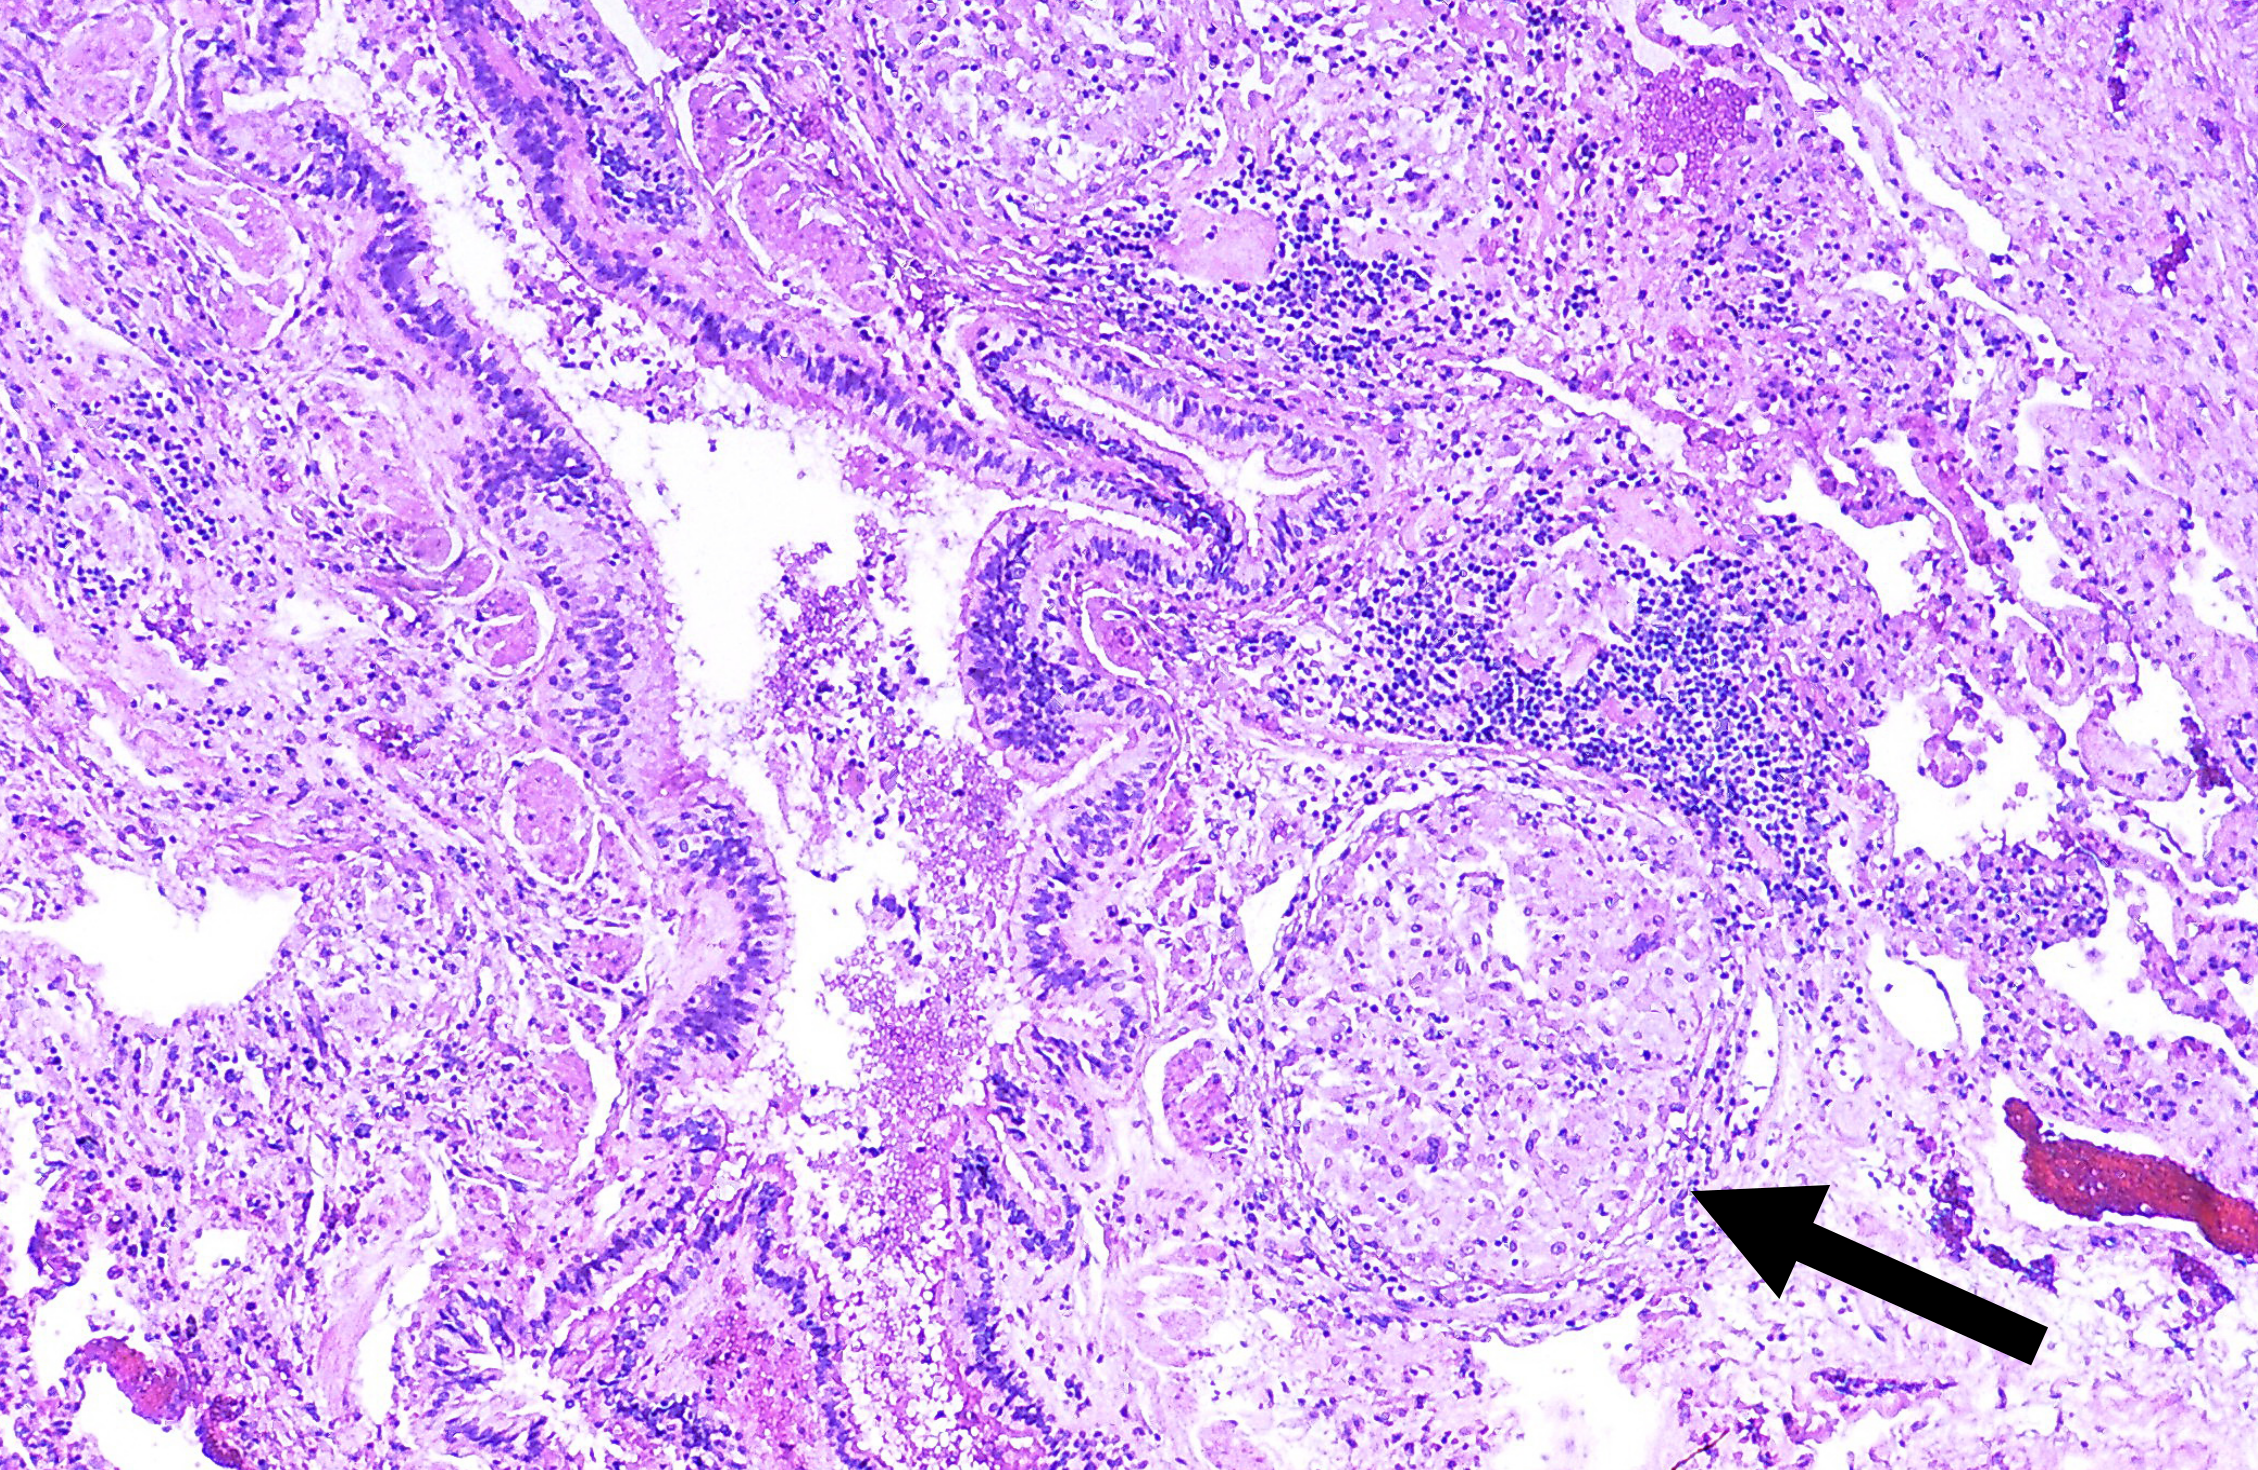 Histology slide of lung tissue with arrow pointing to a dense area of abnormal tissue. The dense area has a patchy appearance with a layer of organized tissue surrounding a less organized core.